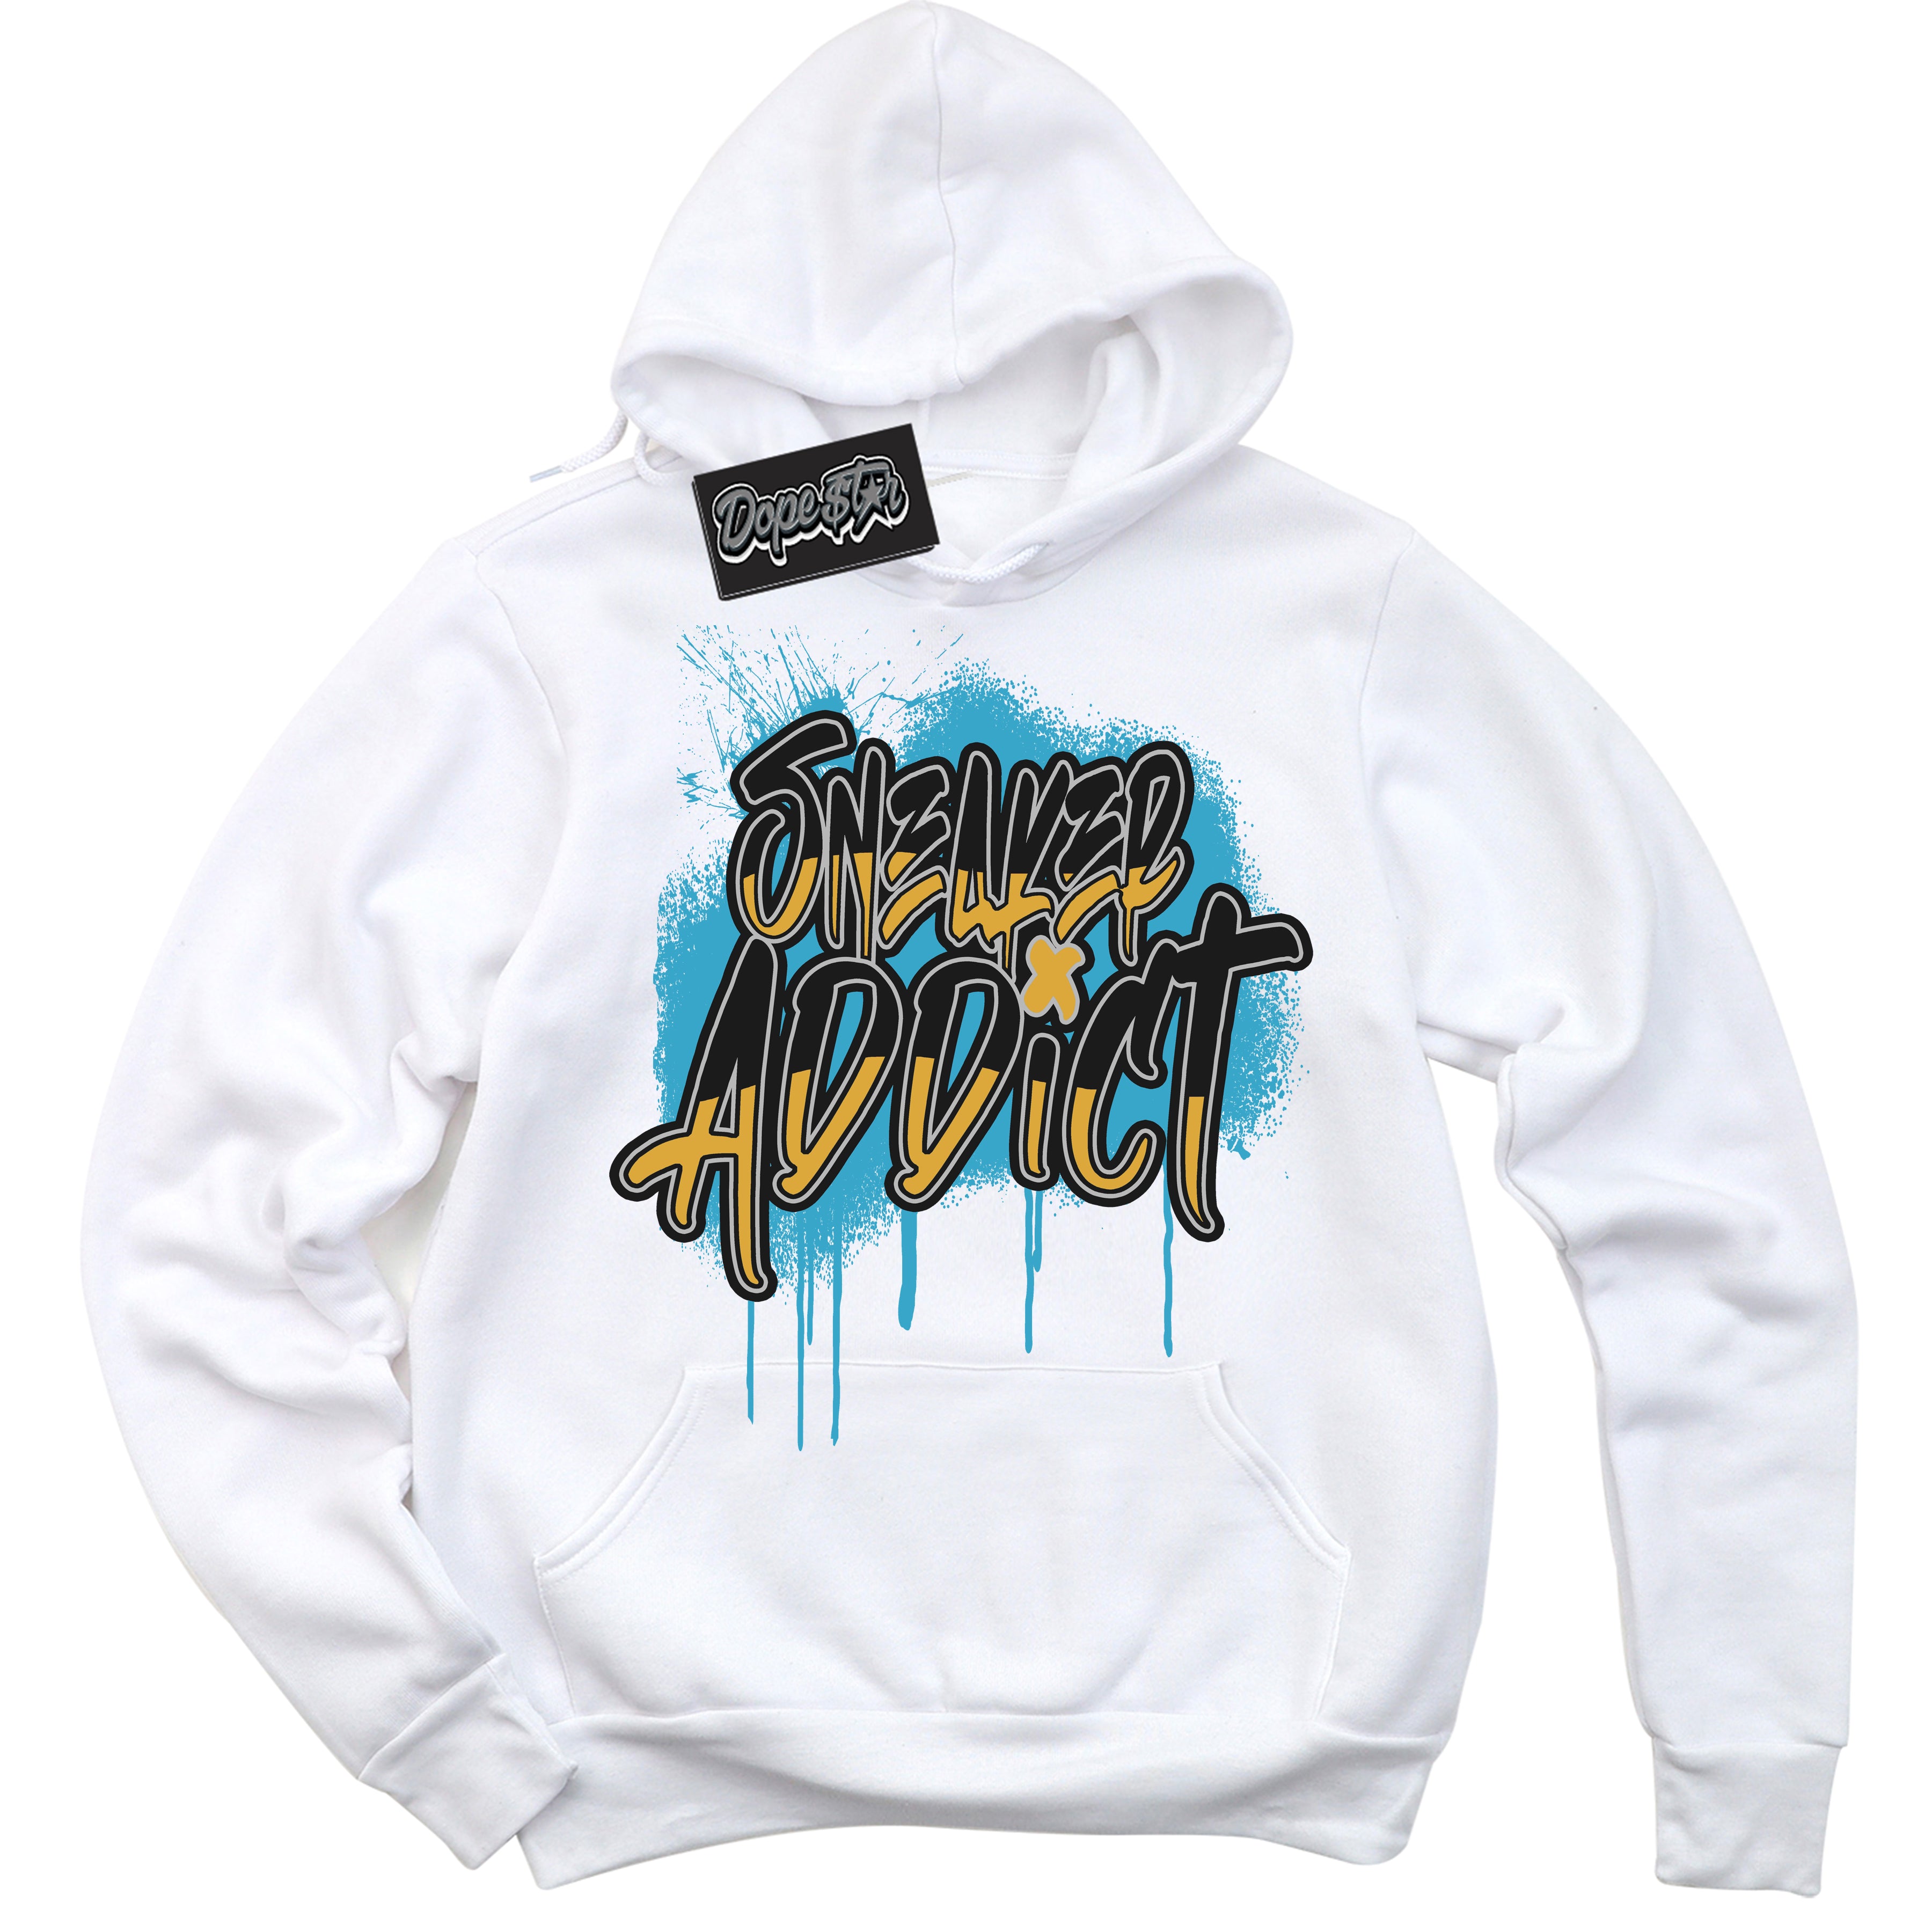 Cool White Graphic Hoodie with “ Sneaker Addict“ print, that perfectly matches Air Jordan 5 AQUA  sneakers